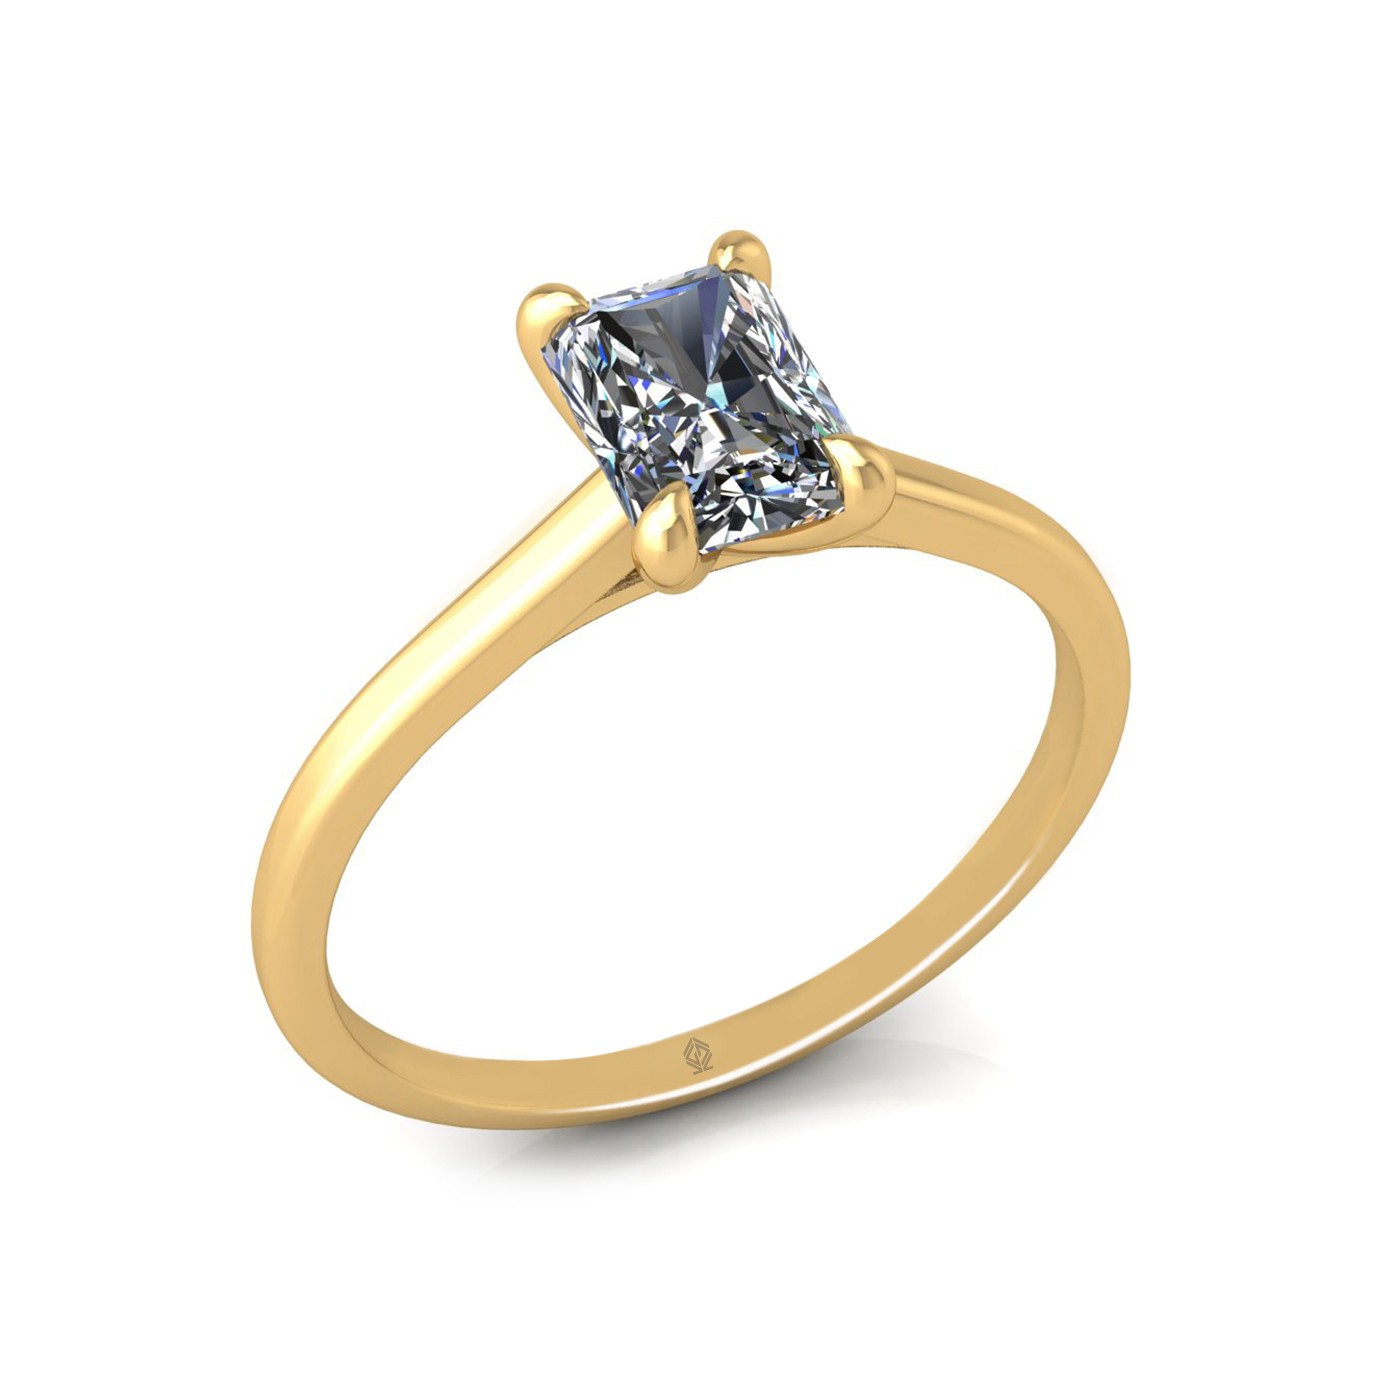 18k yellow gold  1,00 ct 4 prongs solitaire radiant cut diamond engagement ring with whisper thin band